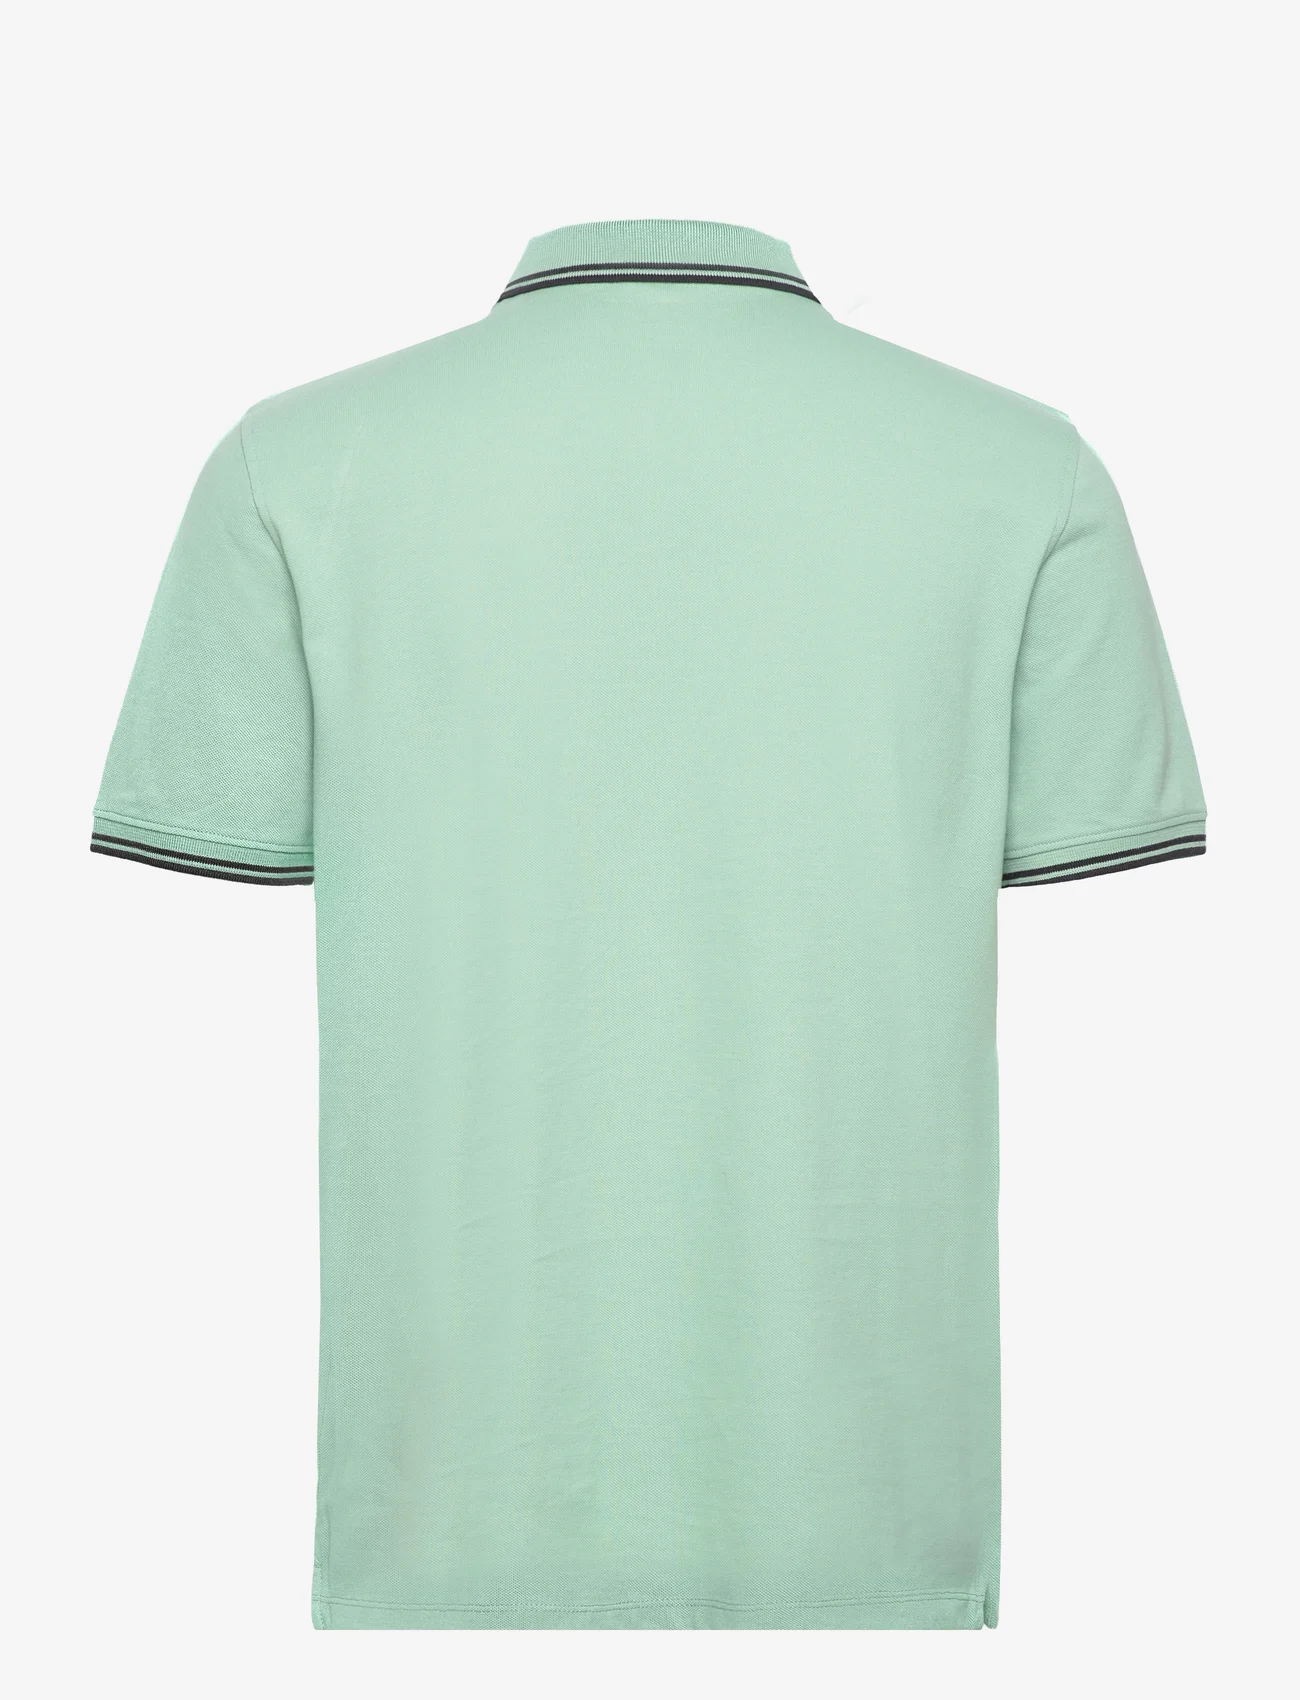 Timberland - MILLERS RIVER Tipped Pique Short Sleeve Polo GRANITE GREEN - short-sleeved polos - granite green - 1